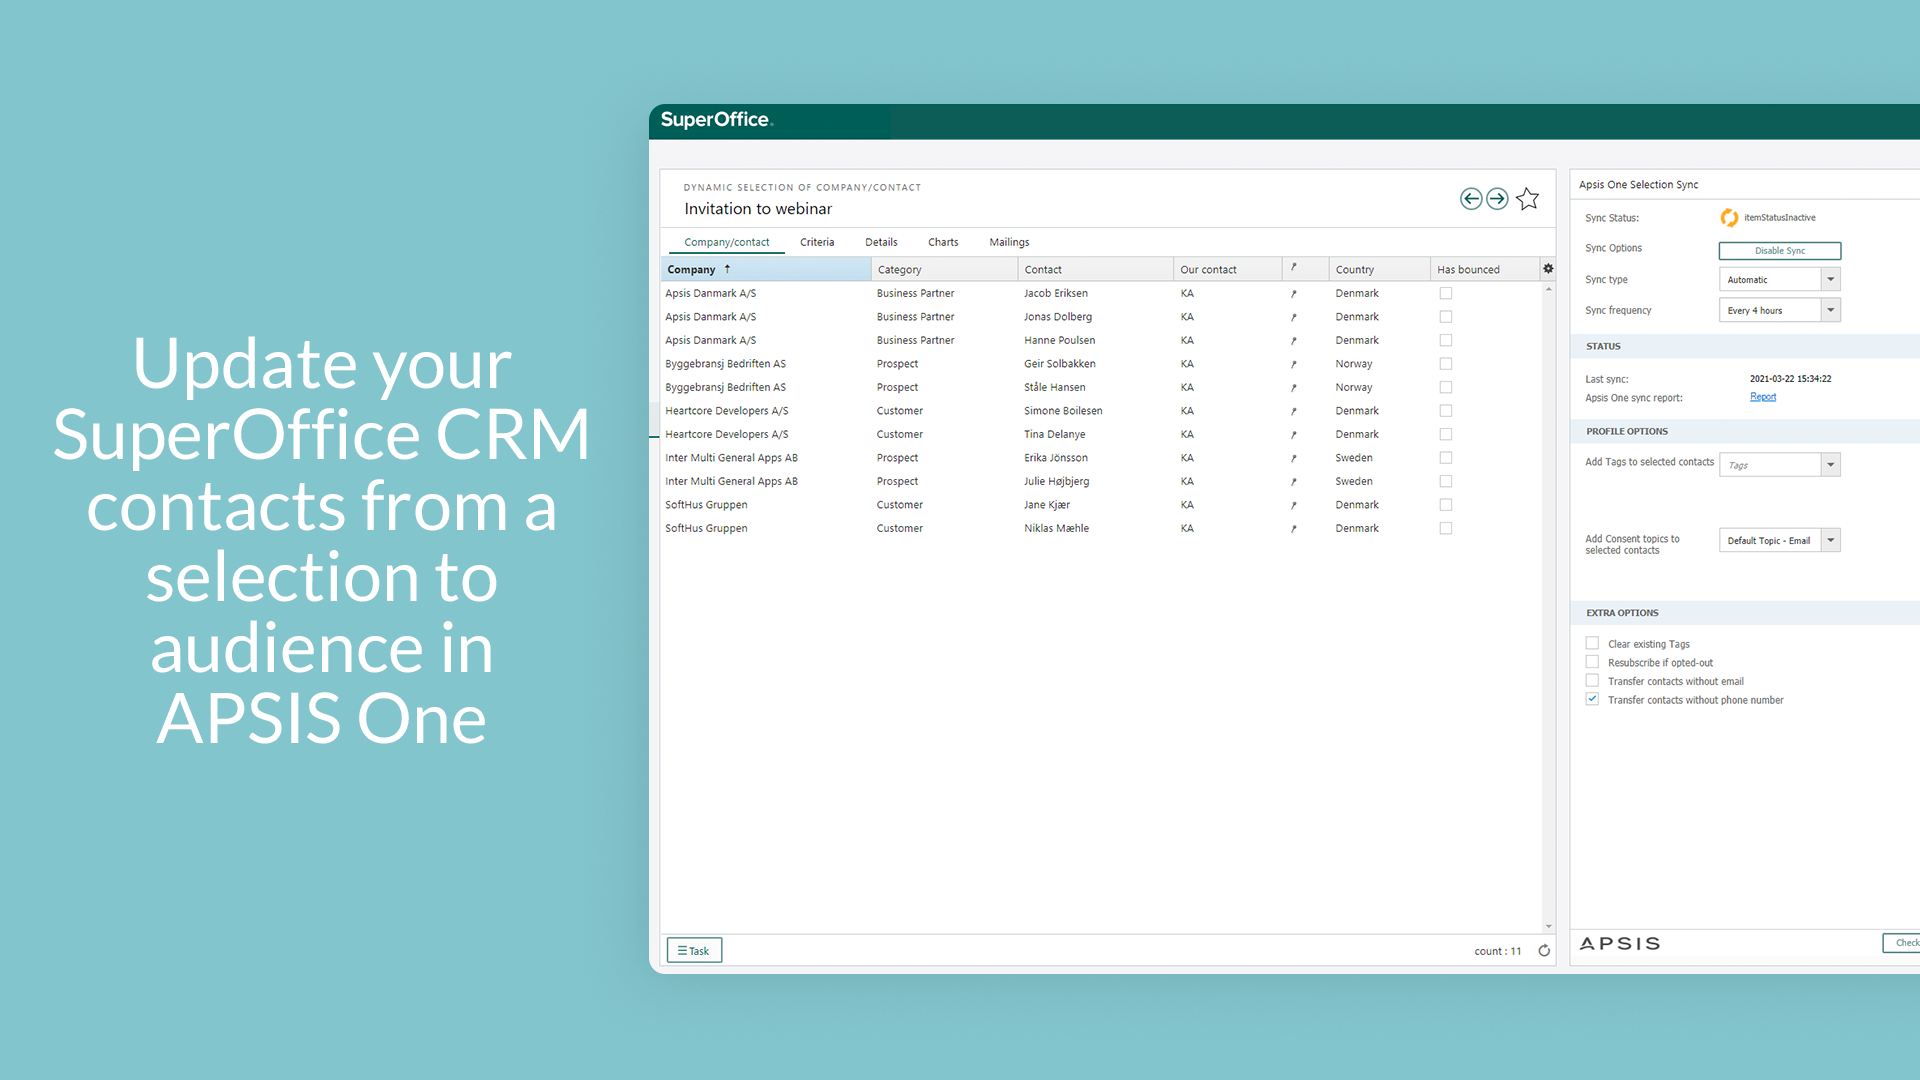 Update your SuperOffice contacts from a selection to audience in APSIS One